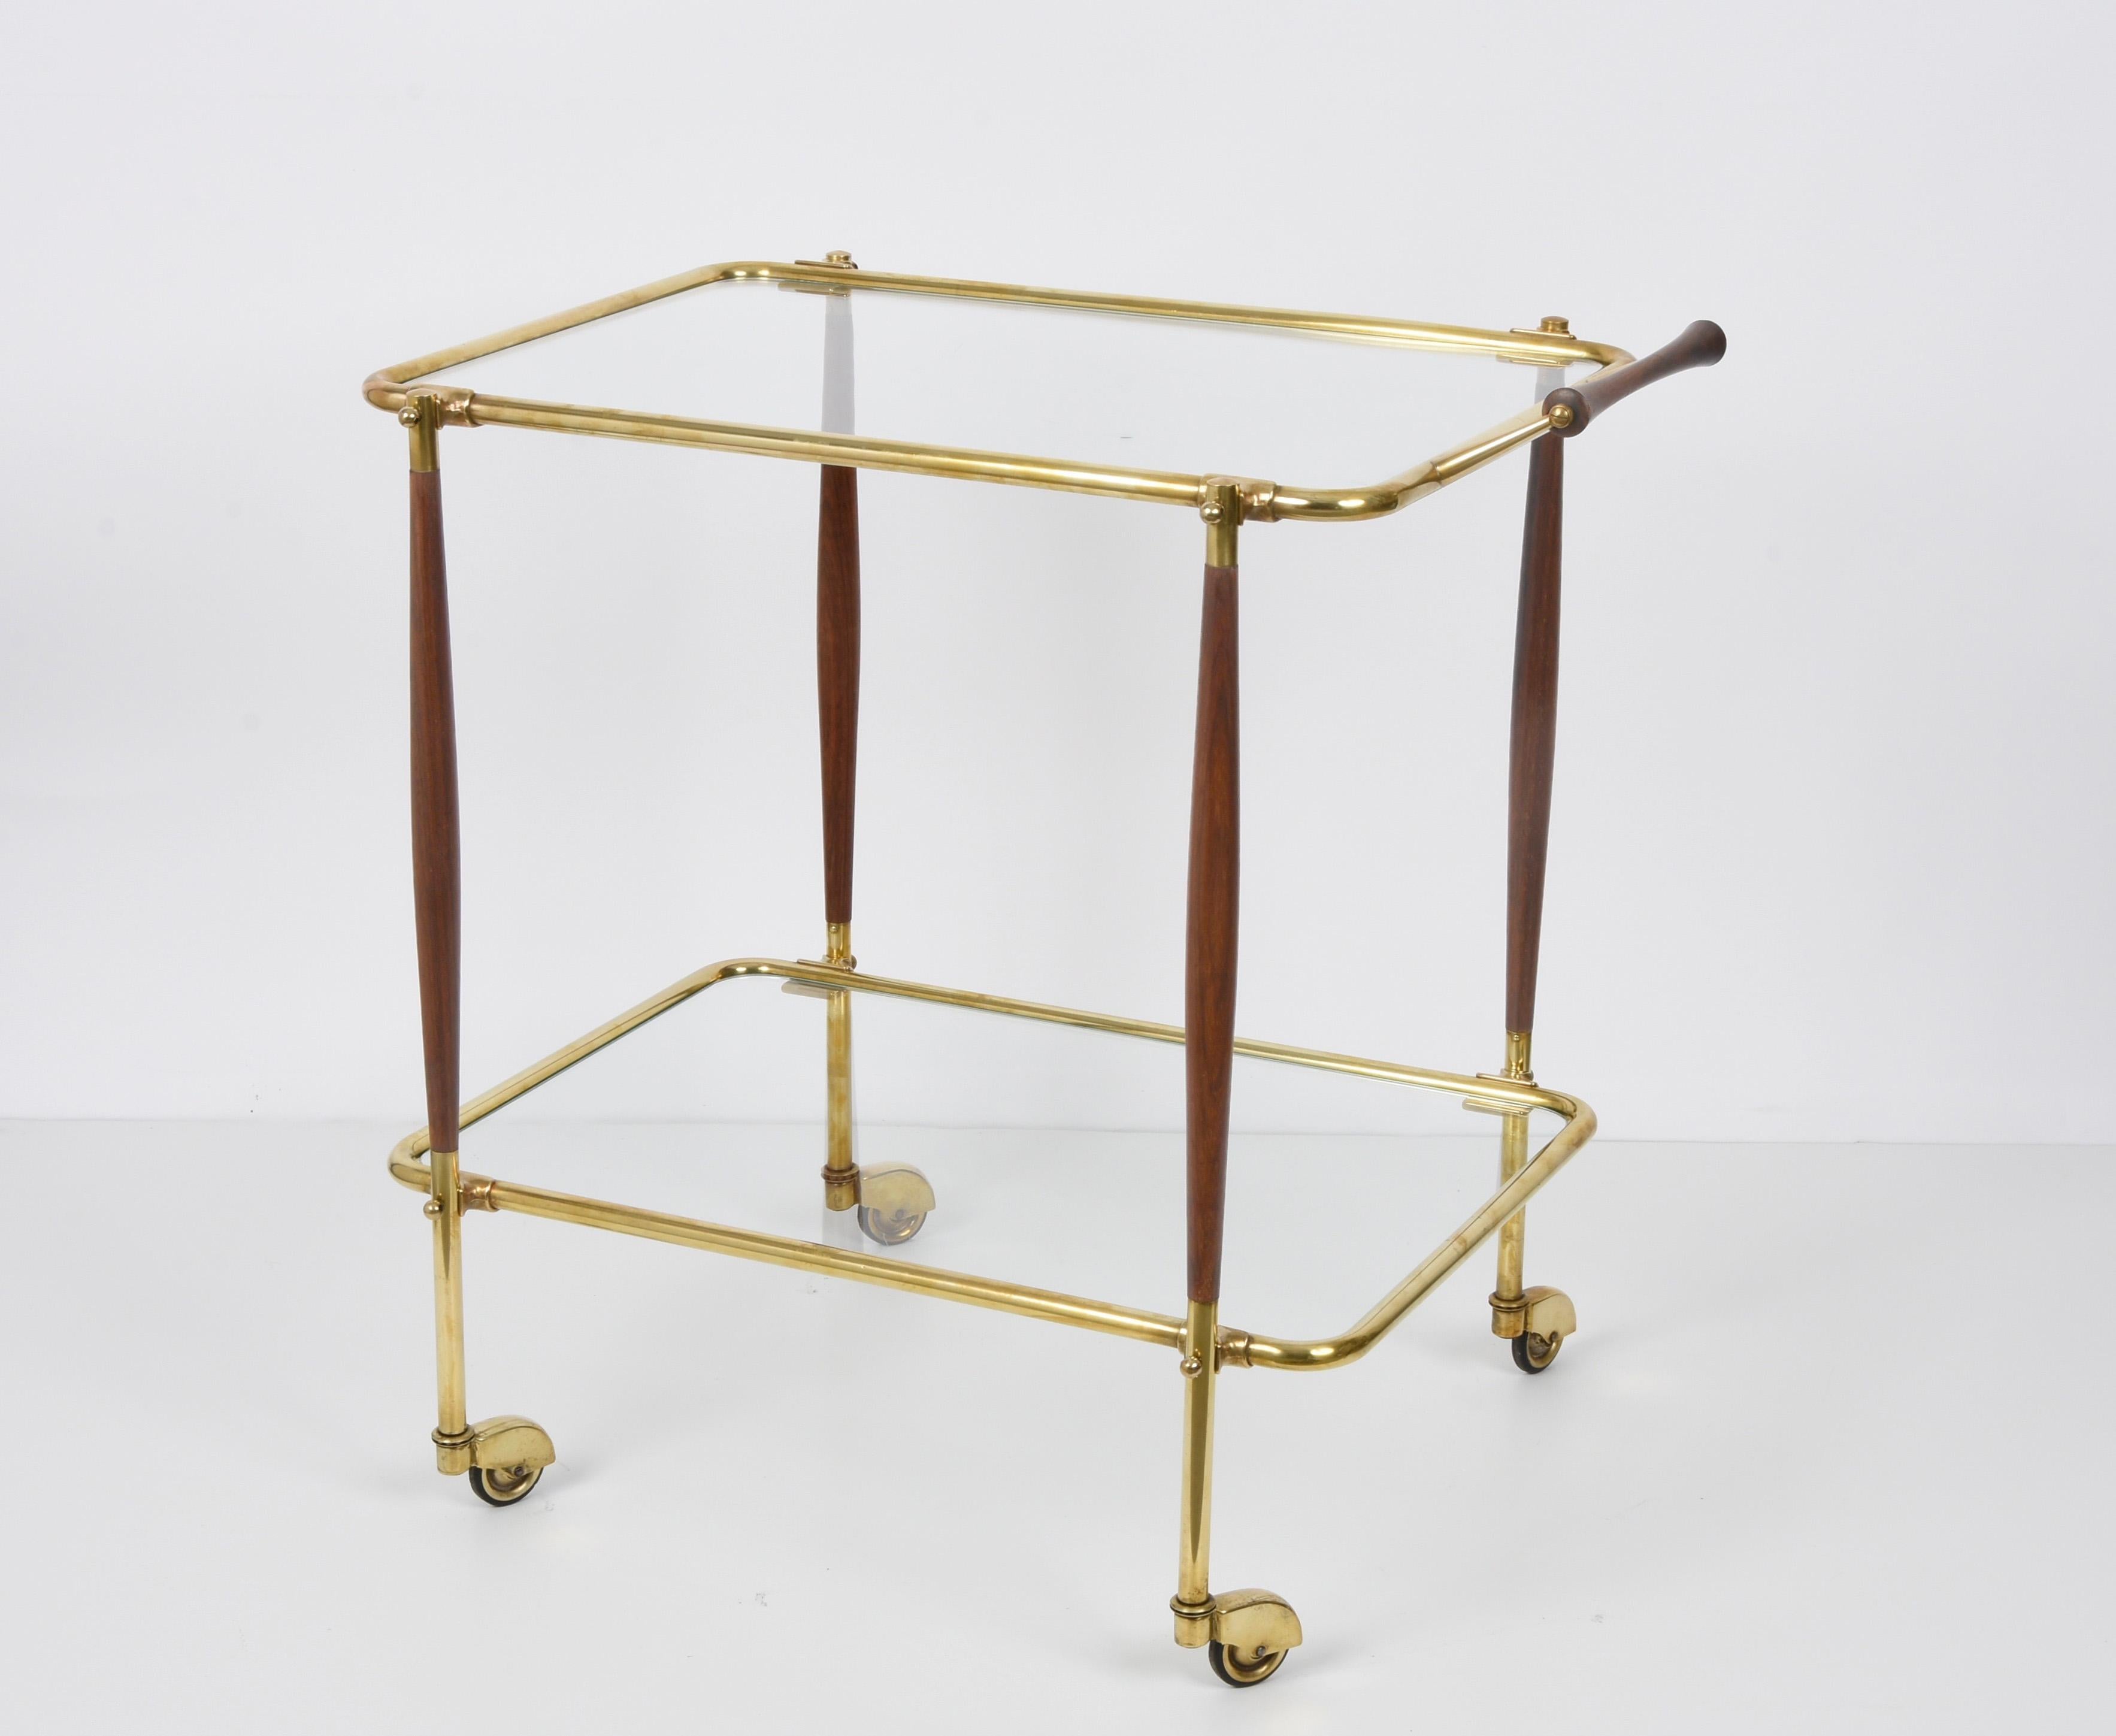 Amazing midcentury bar trolley designed in brass and wood. This fantastic piece was designed by Cesare Lacca during the 1950s.

This wonderful item has an elegant structure in brass with a central part in wood holding two internal glass shelves